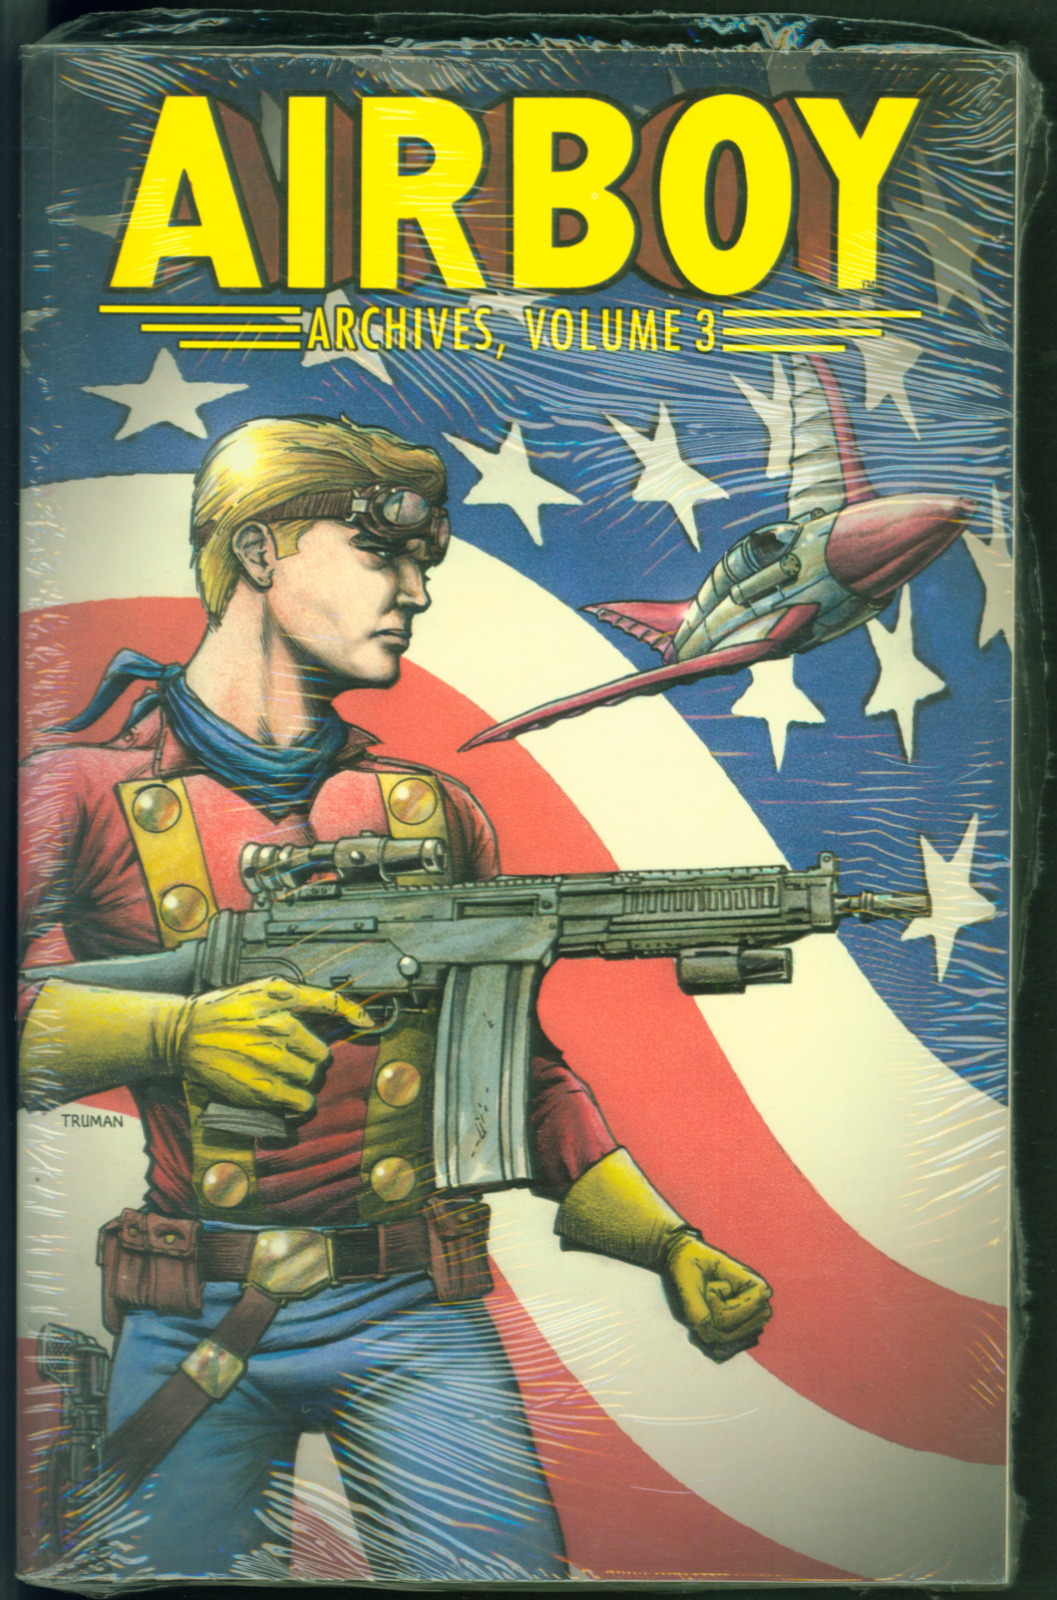 AIRBOY ARCHIVES VOLUME 3 By Chuck Dixon  New  Still in Factory Shrinkwrap